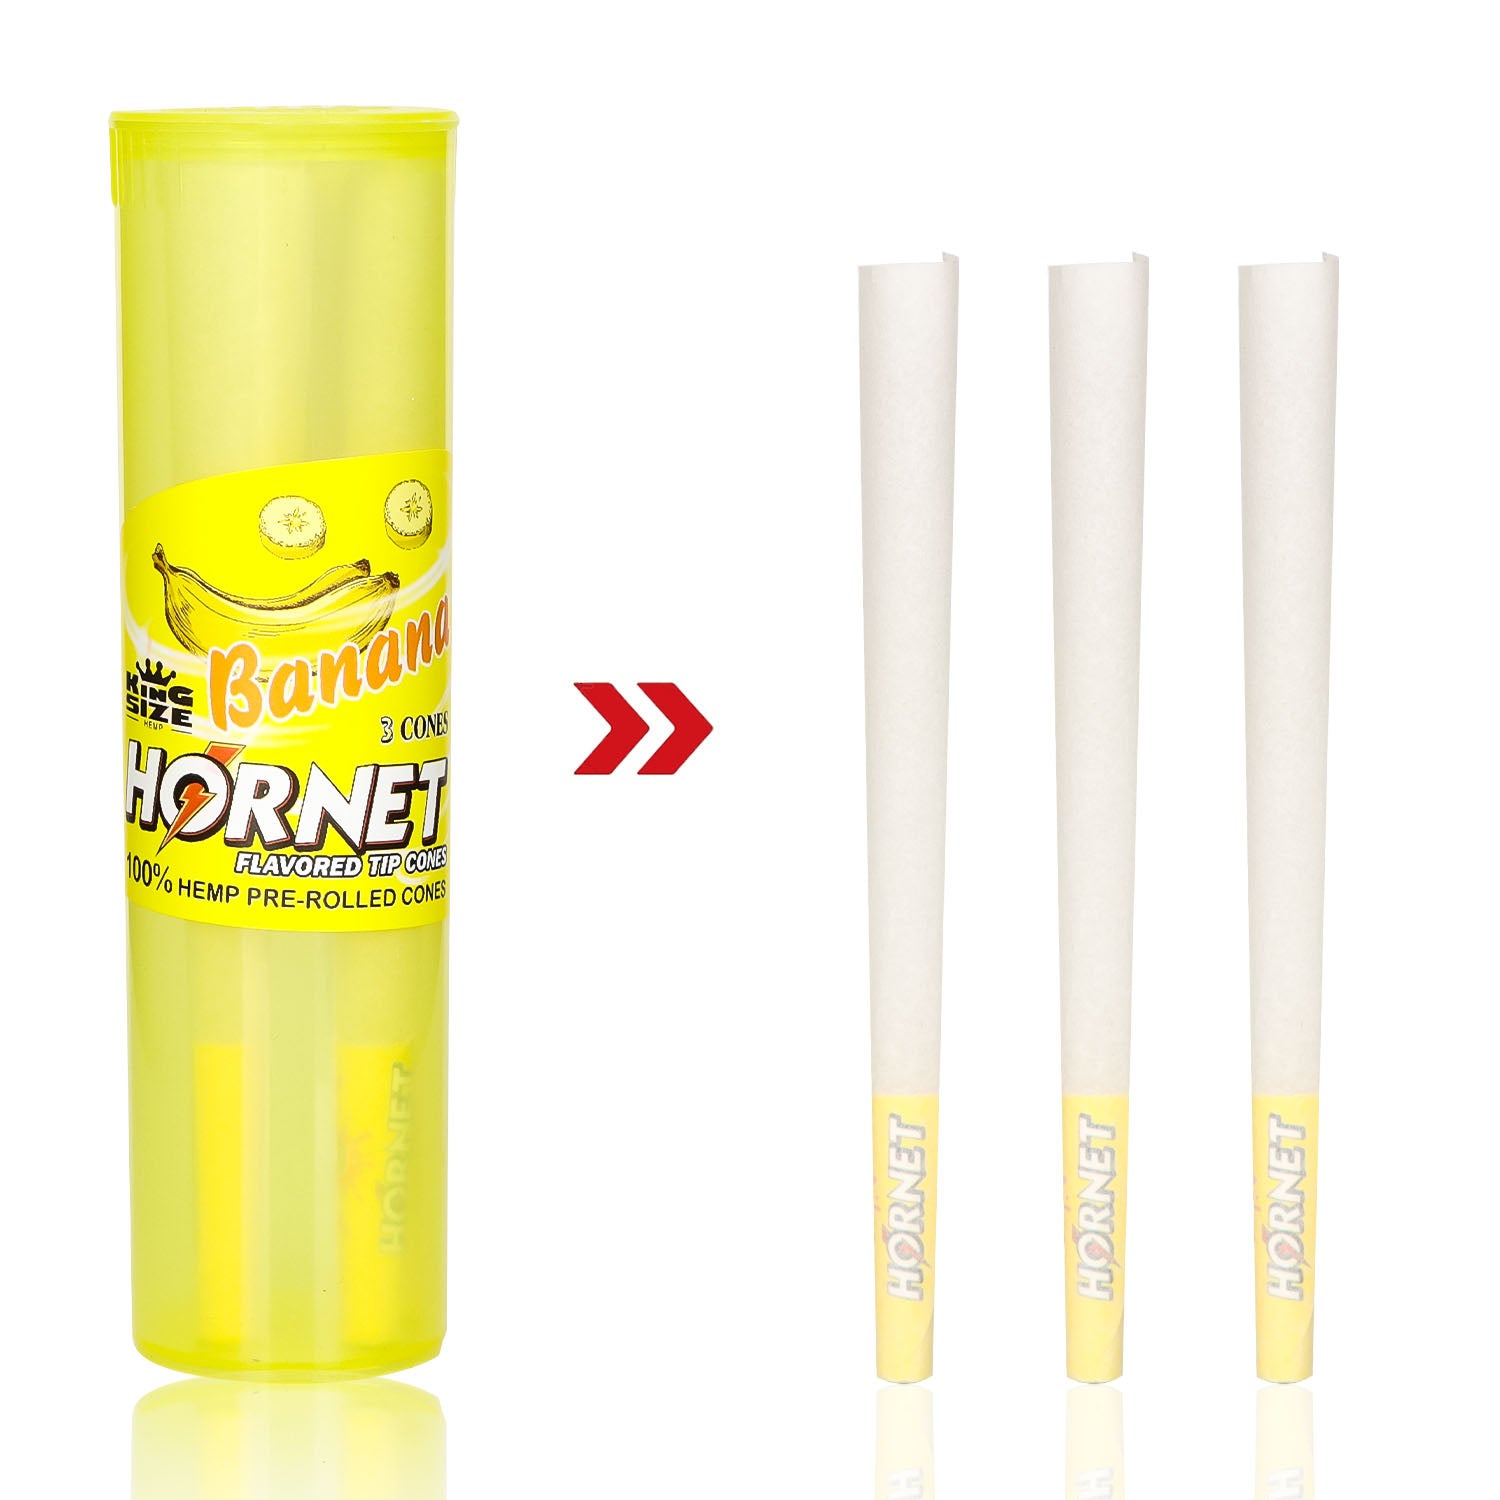 HORNET Banana Flavors Pre Rolled Cones, King Size Pre Rolled Rolling Paper With Tips, Slow Burning Rolling Cones & Flavored Pop, 3 PCS / Tube, 12 Tubes / Box